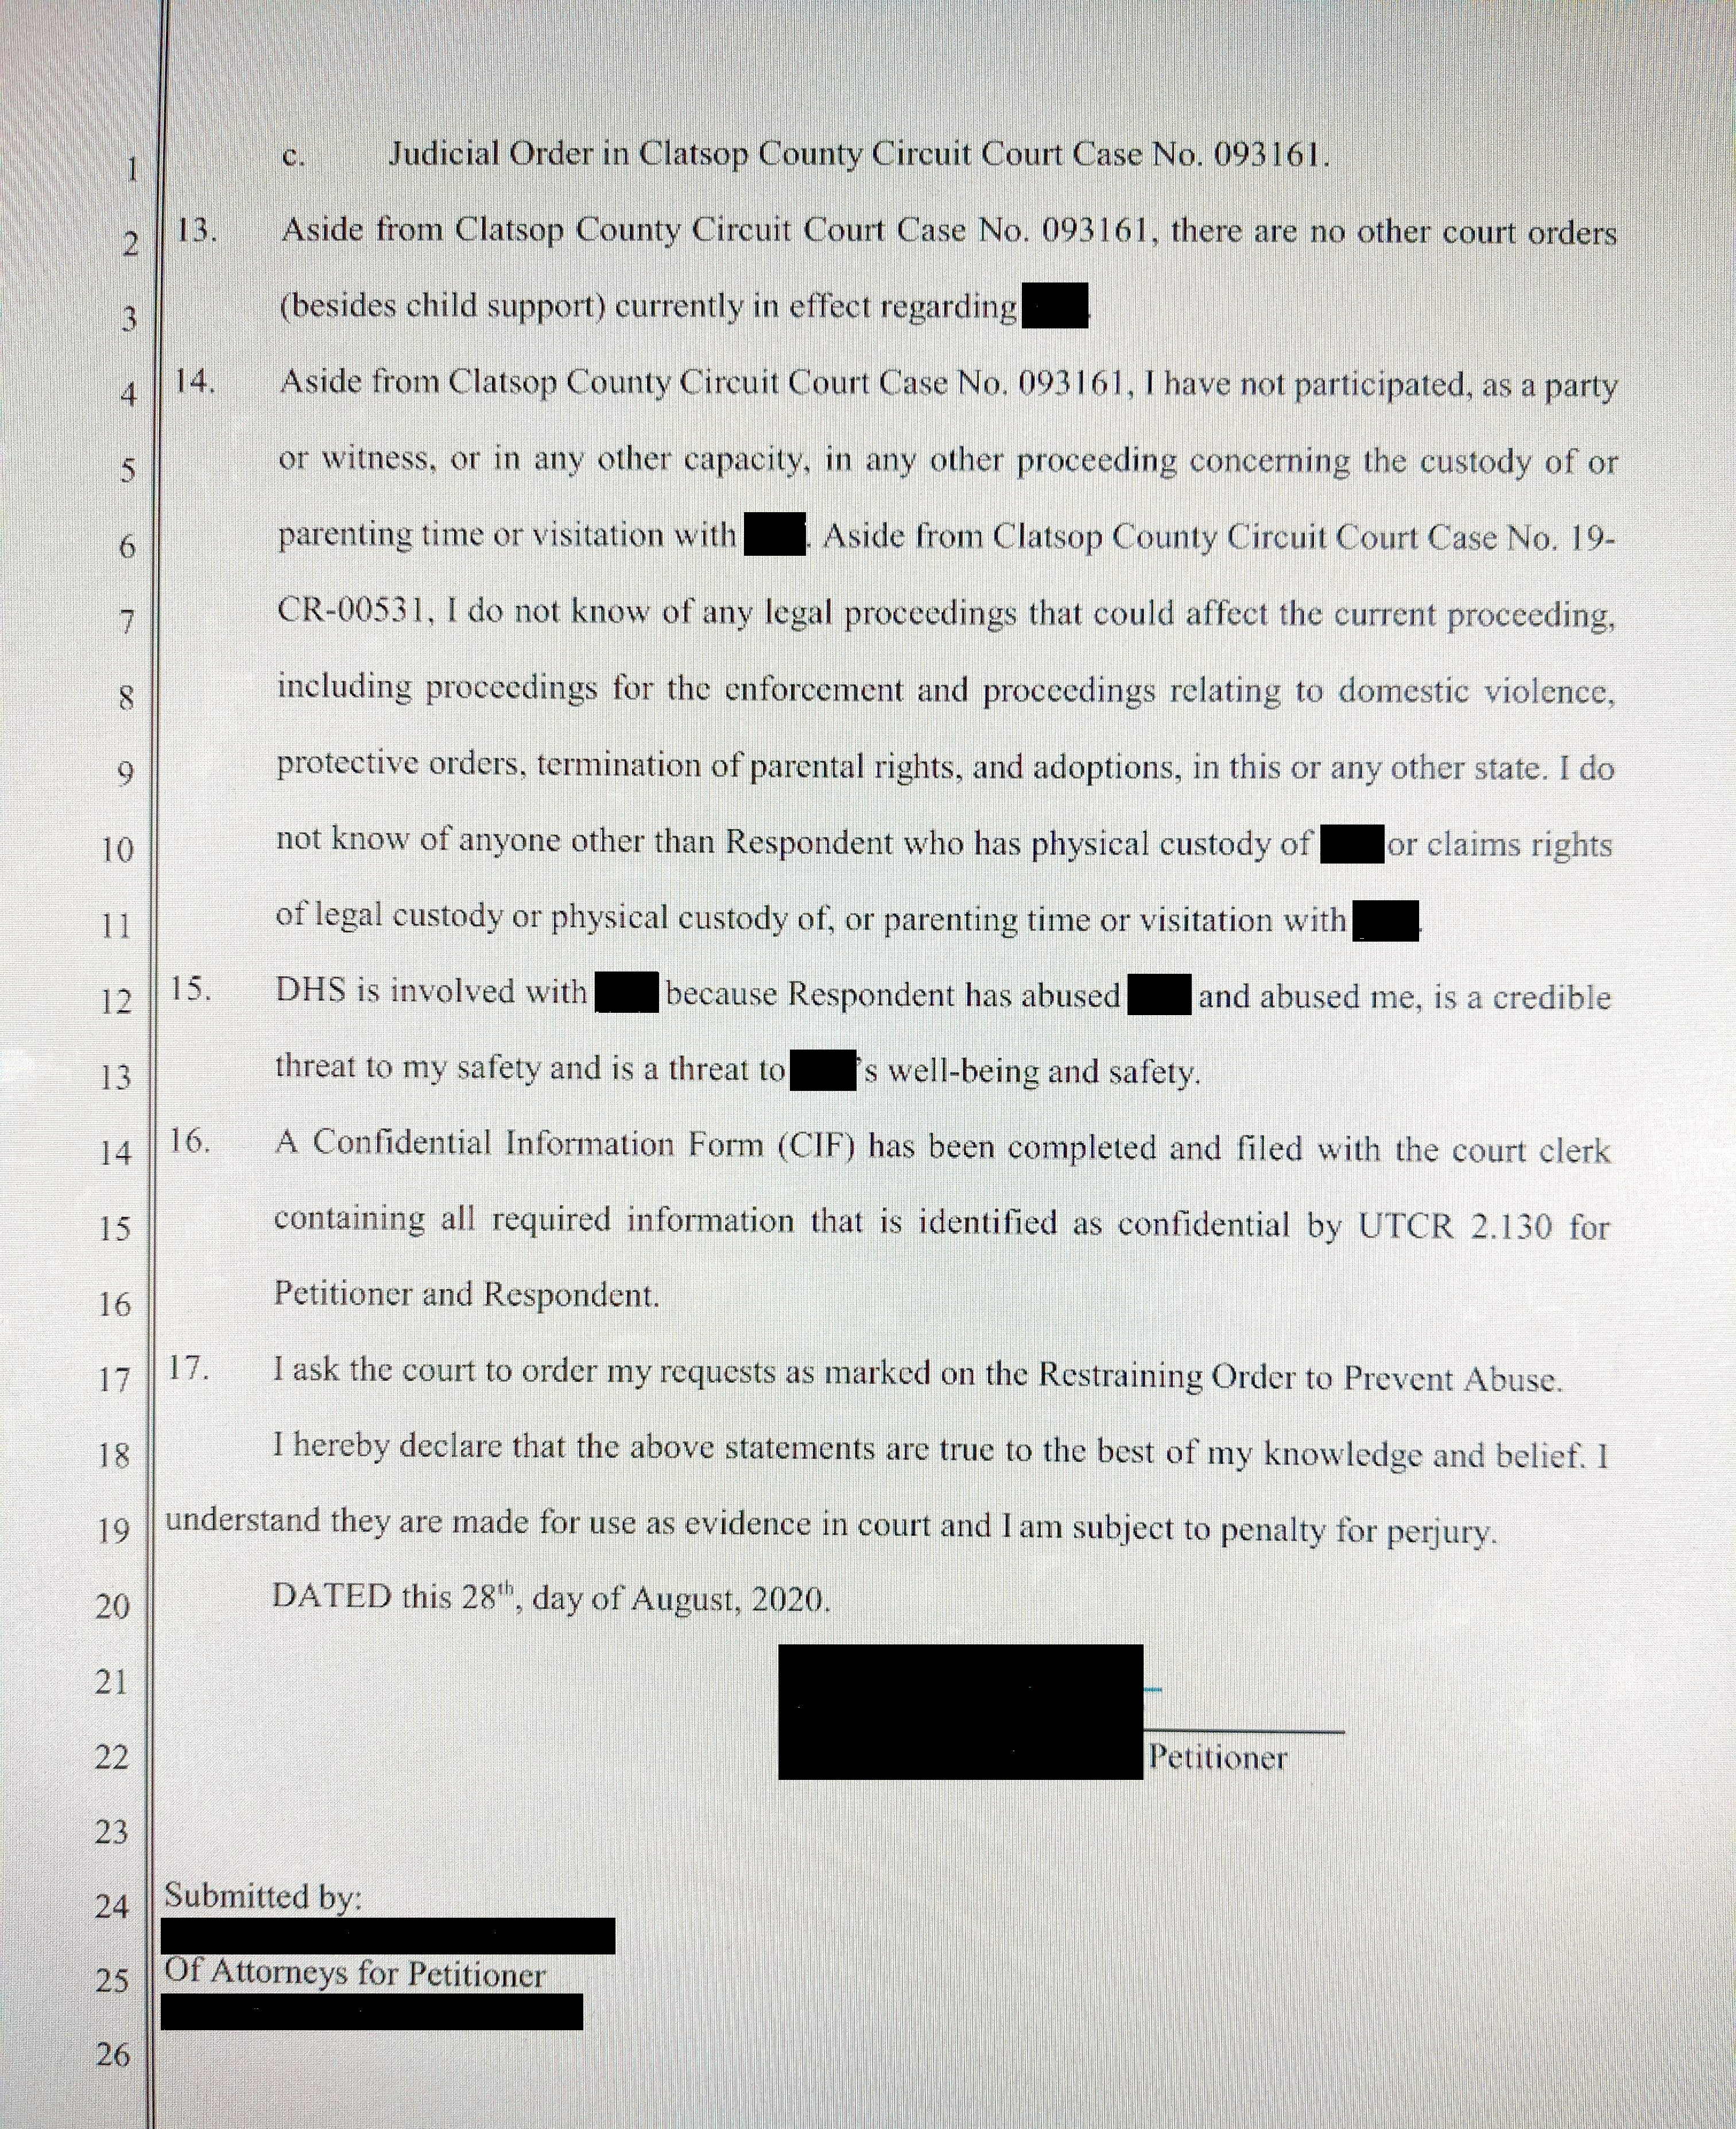 - IMAGE - Court document detailing Alexander Pappas' physical, sexual, and psychological abuse